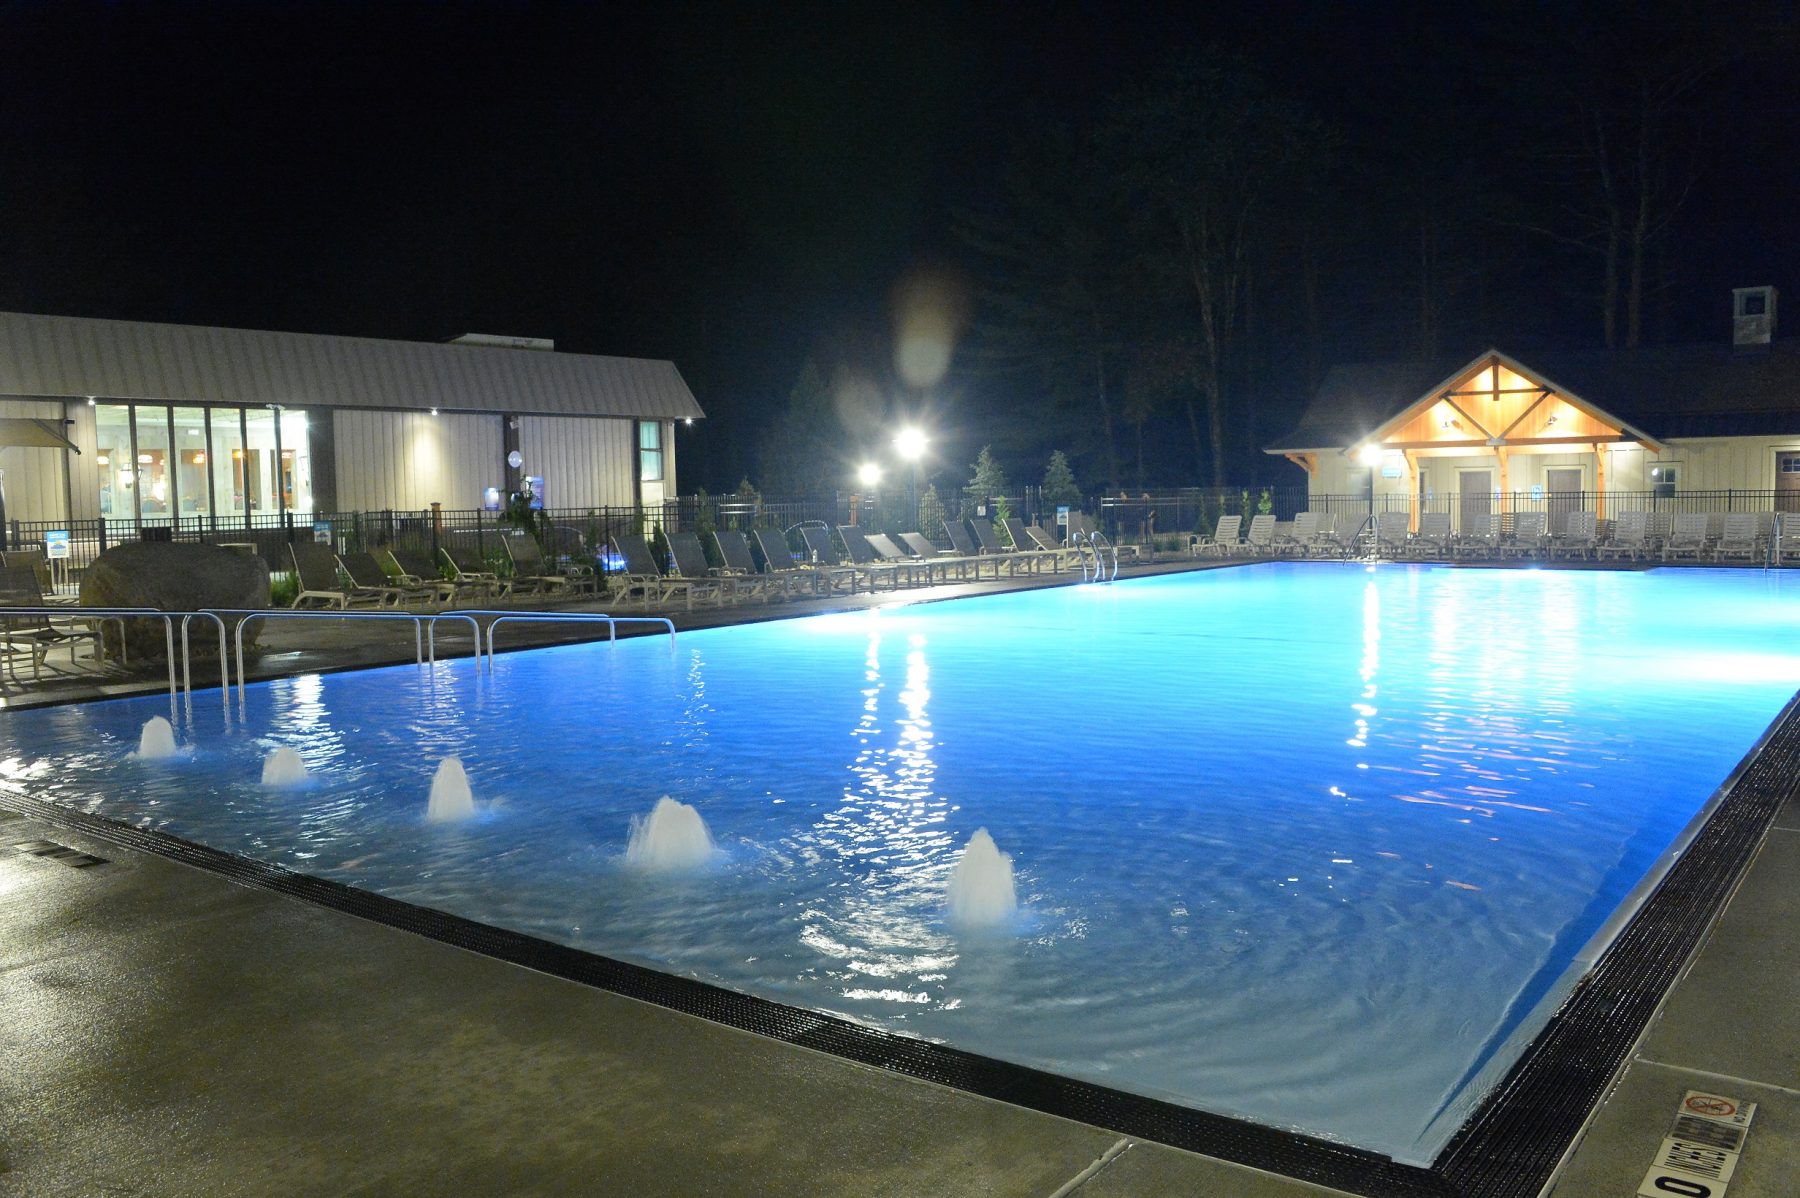 The zero entry pool is shown at night in the foreground. The east building and bathrooms are shown in the background.